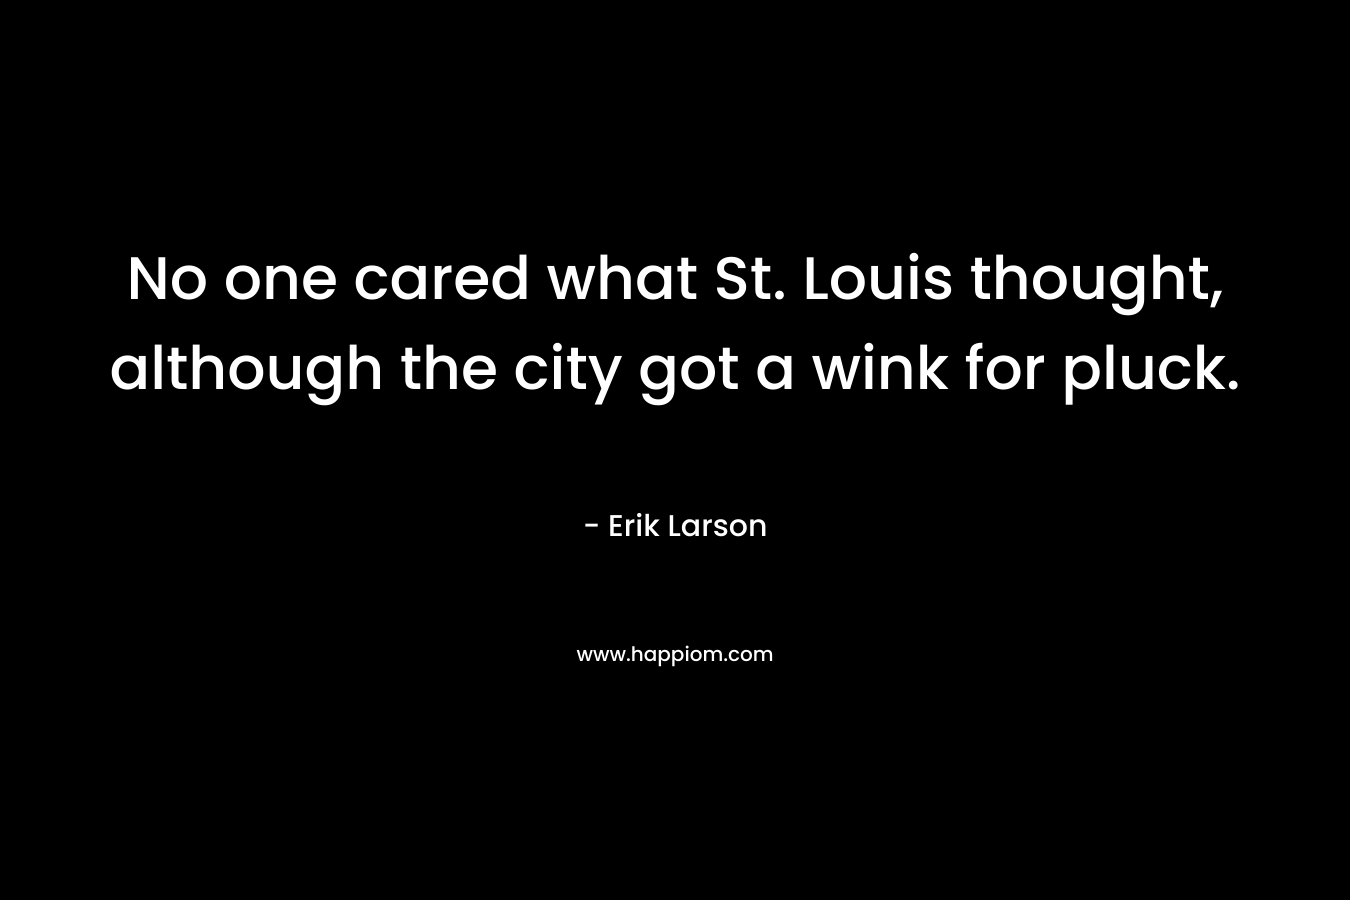 No one cared what St. Louis thought, although the city got a wink for pluck. – Erik Larson